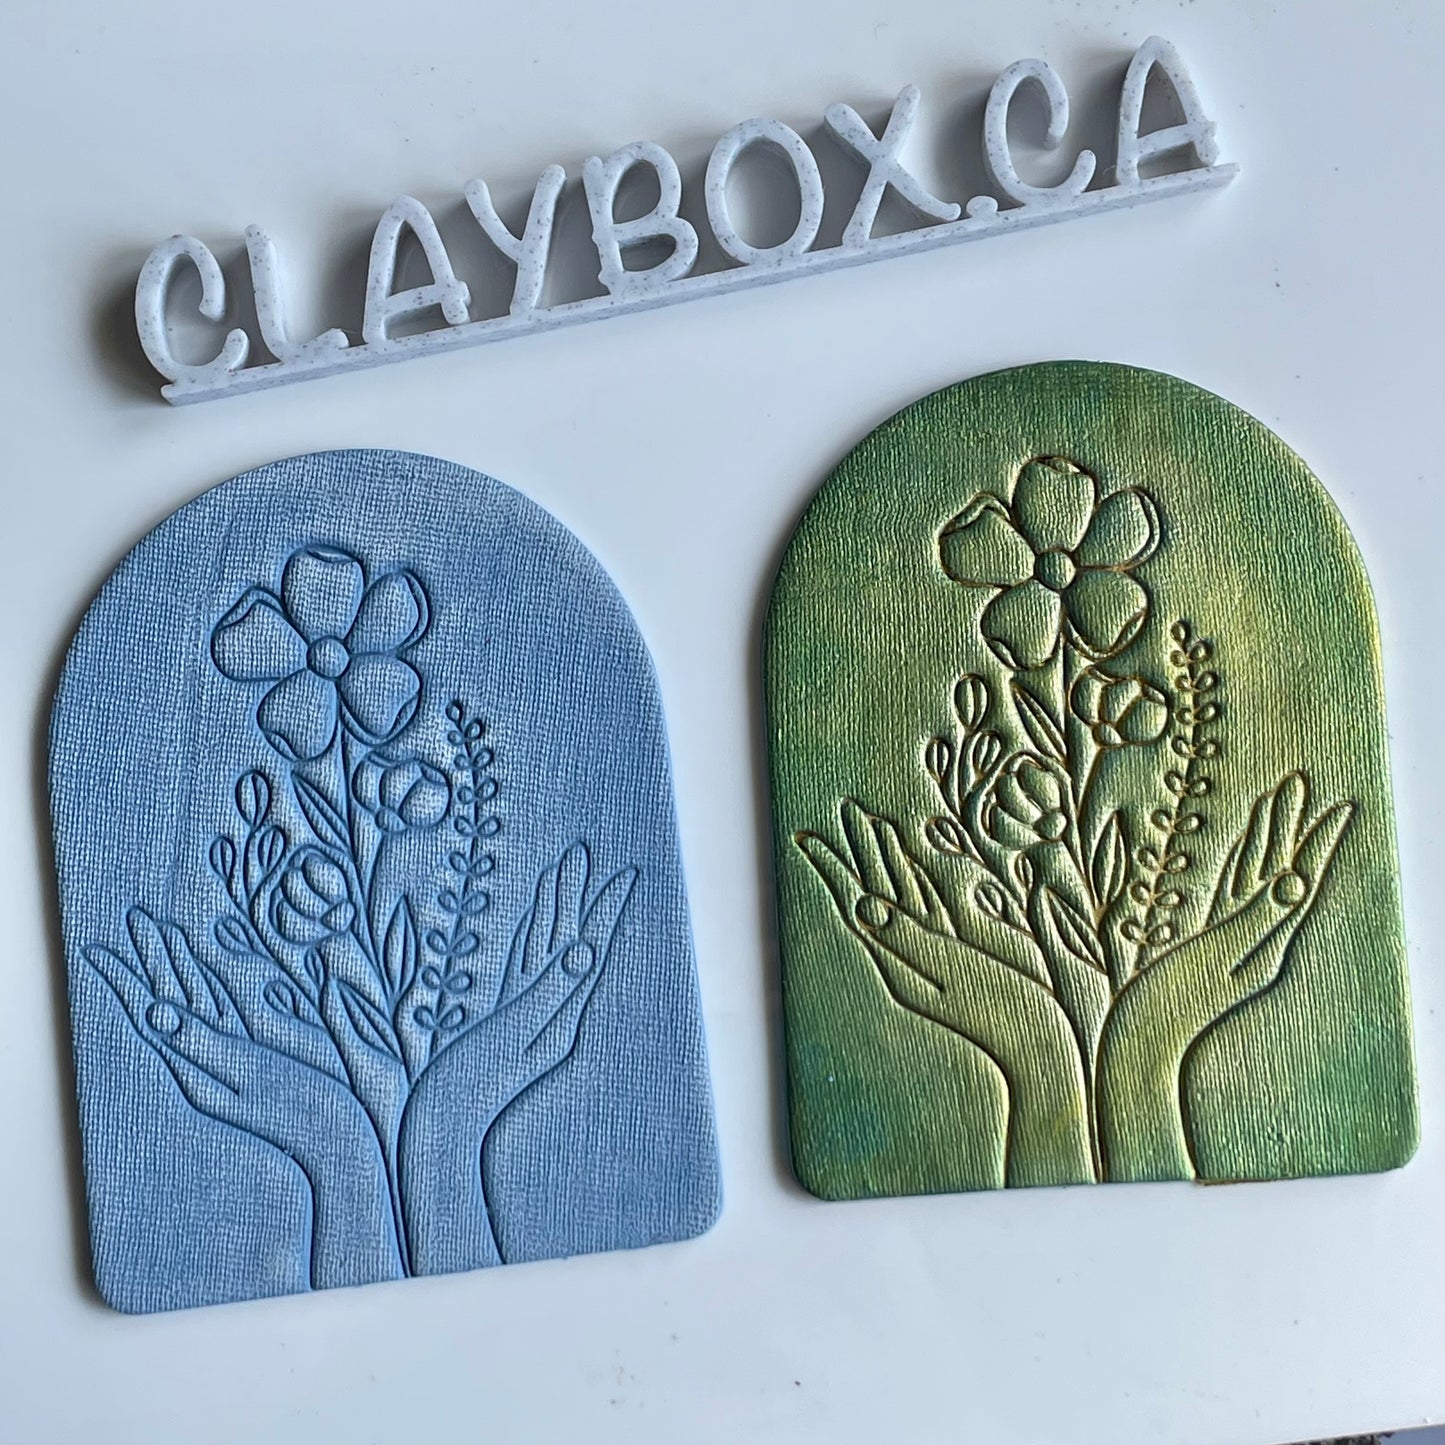 Wildflower hands stamp and matching cutter - made for use with polymer clay